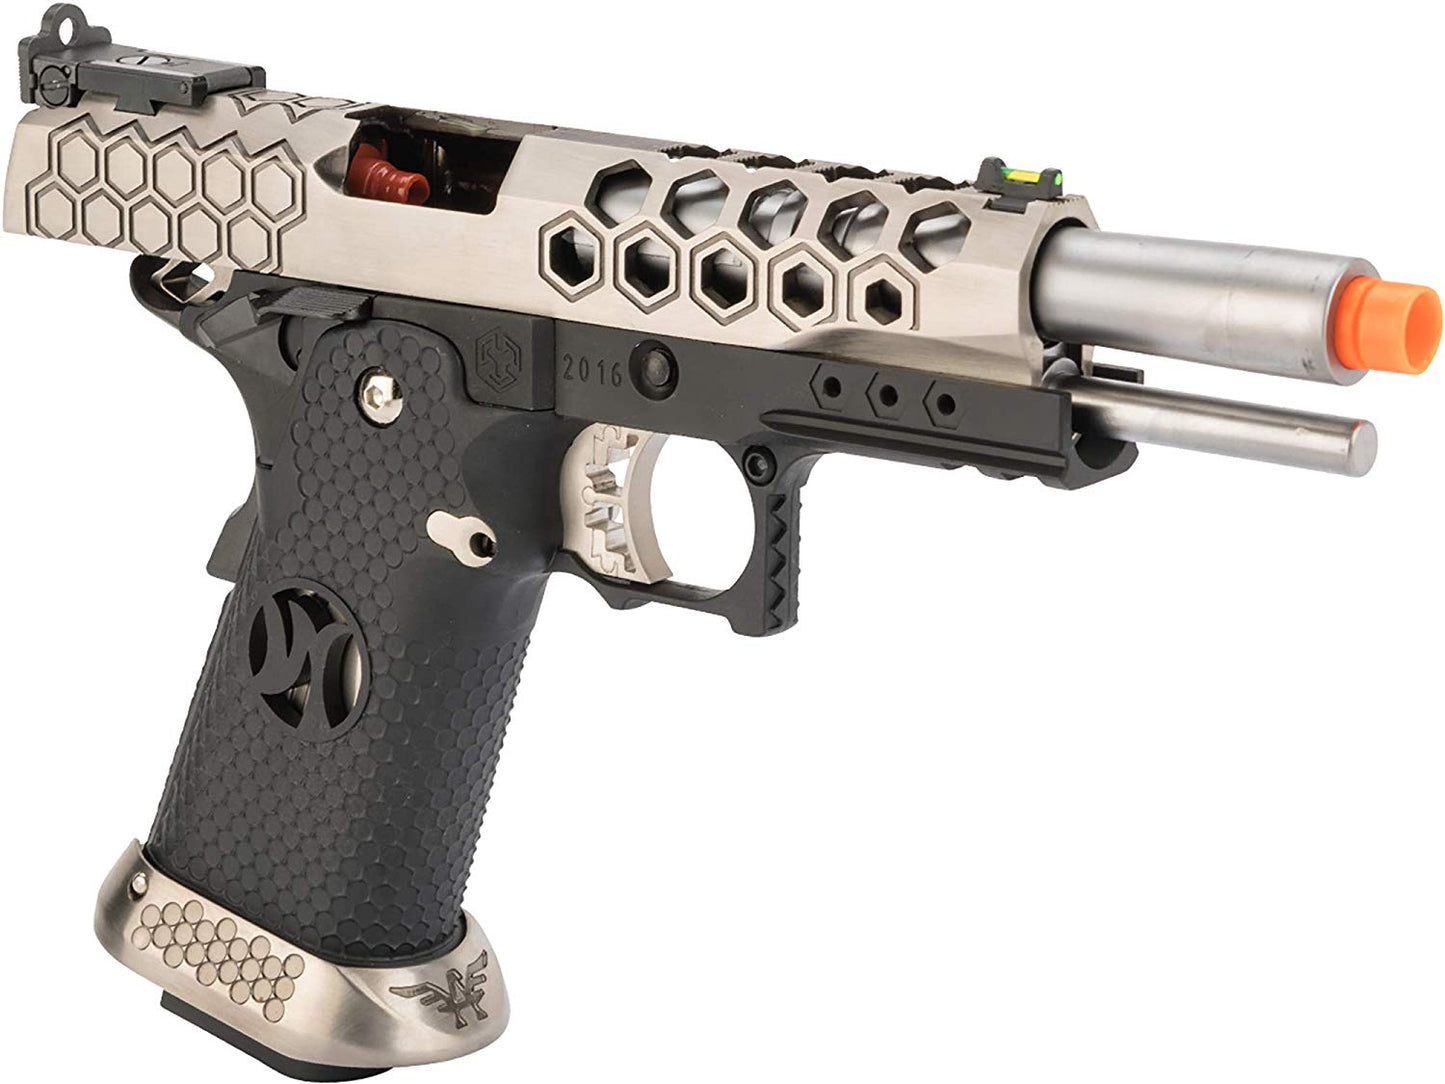 AW Custom HX25 Full Metal Competition Ready Gas Blowback Airsoft Pistol - Silver - AW Custom